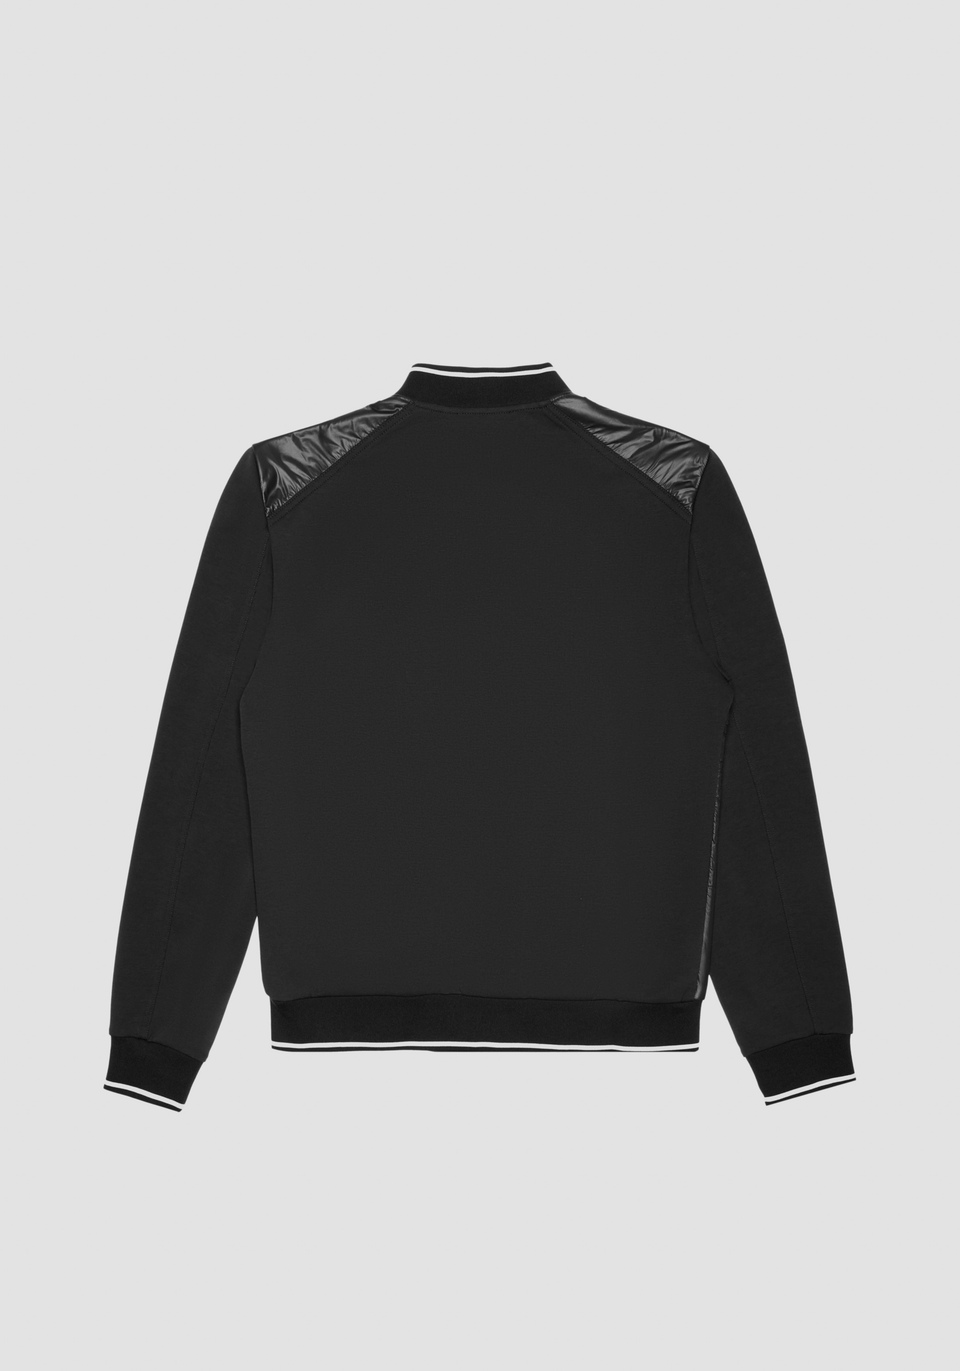 REGULAR FIT SWEATSHIRT IN COTTON BLEND WITH NYLON CONTRAST AND LOGO RUBBER PATCH - Antony Morato Online Shop